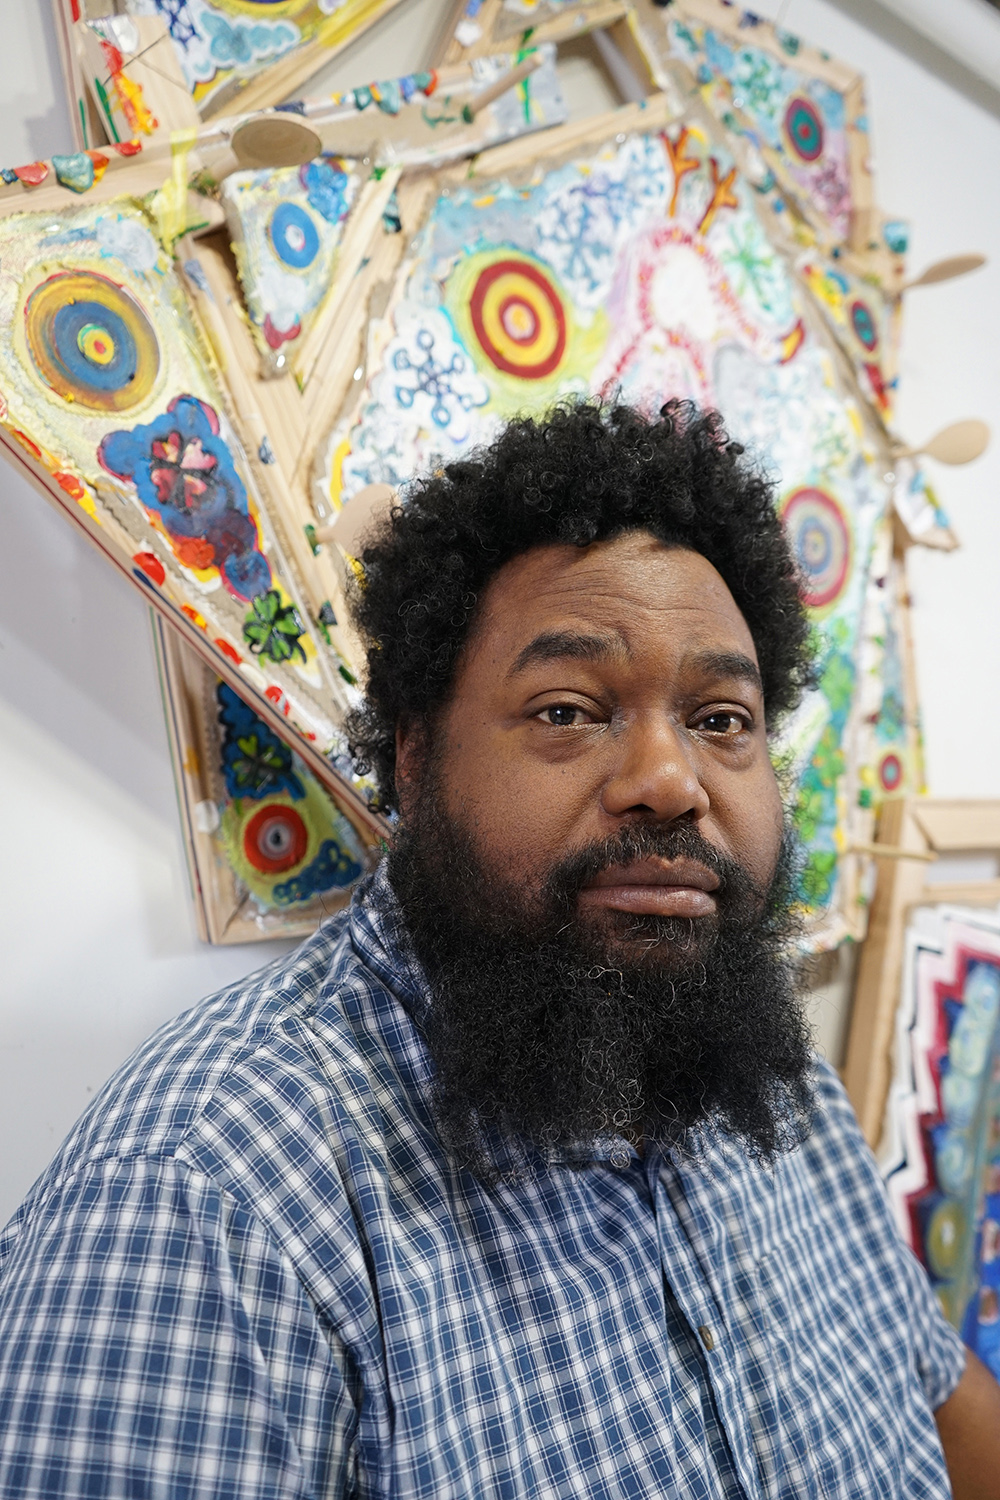 Color photograph of a dark skinned man with a long dark bear and wearing a checkered blue and white shirt; he sits underneath a colorful abstract artwork and looks directly at the camera